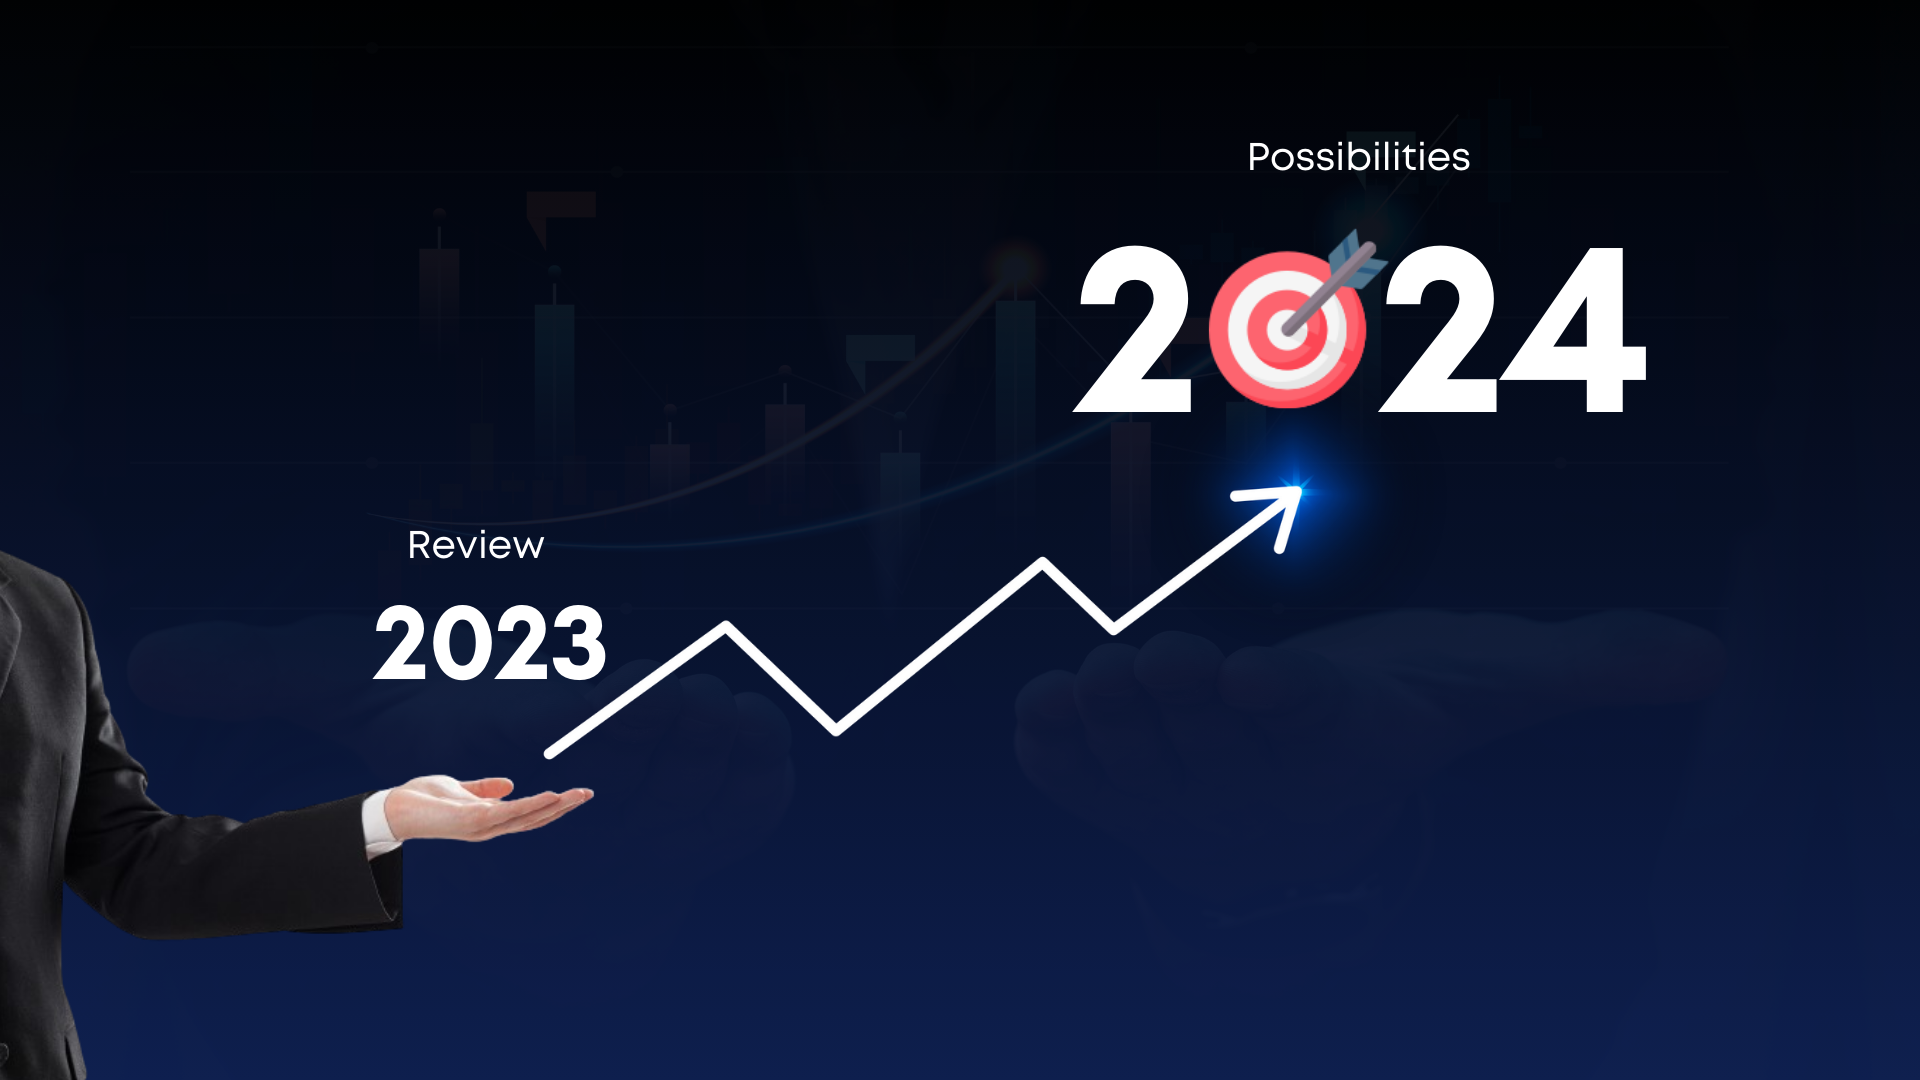 2023 Review 2024 Possibilities  